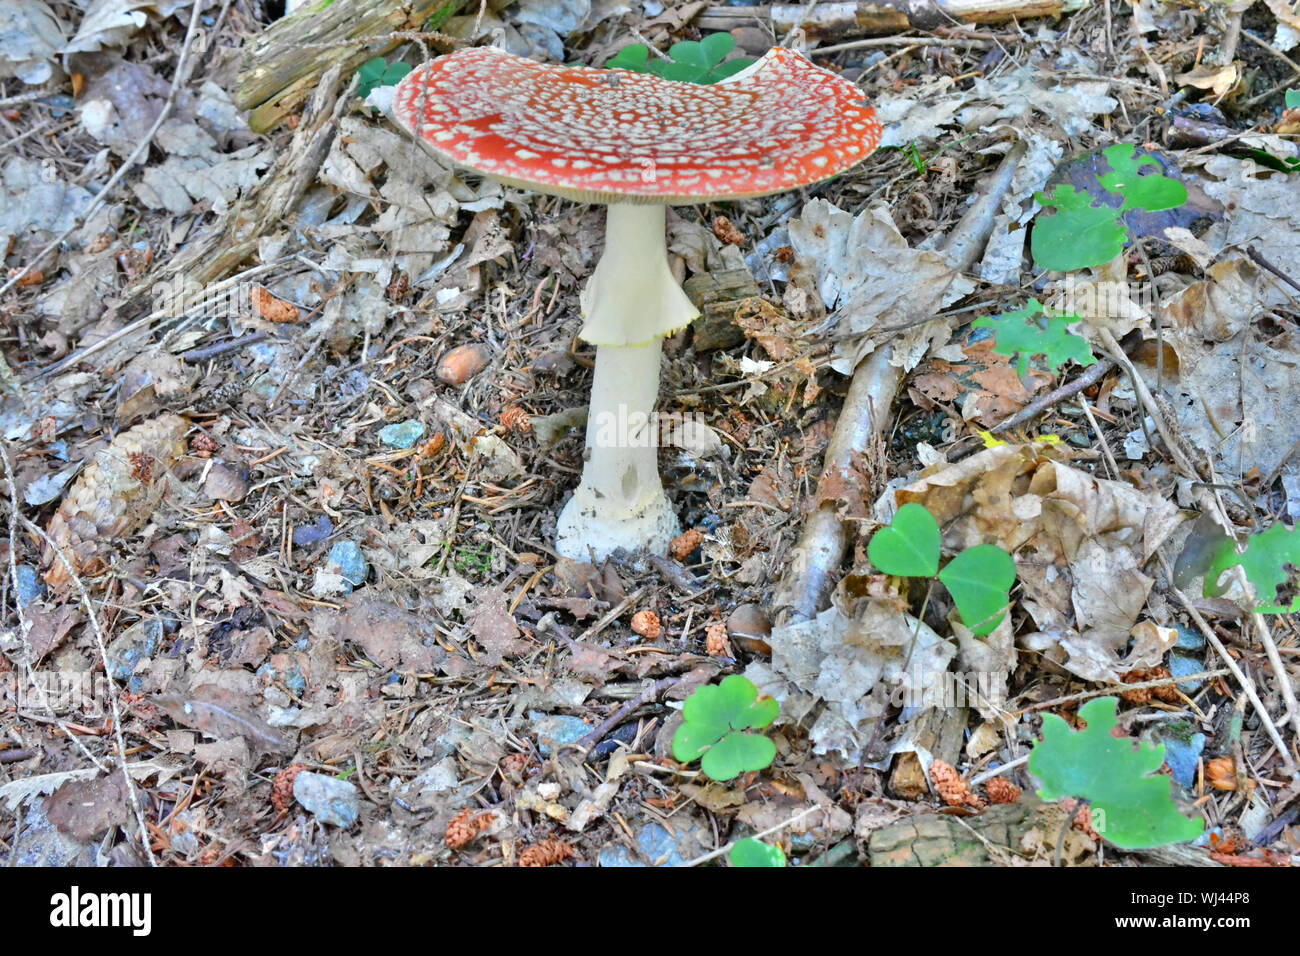 The Amanite Muscaria otherwise known as the Fly Agaric, source of the psycho-active drug Muscarine used by shamans for over 20,000 years. Stock Photo